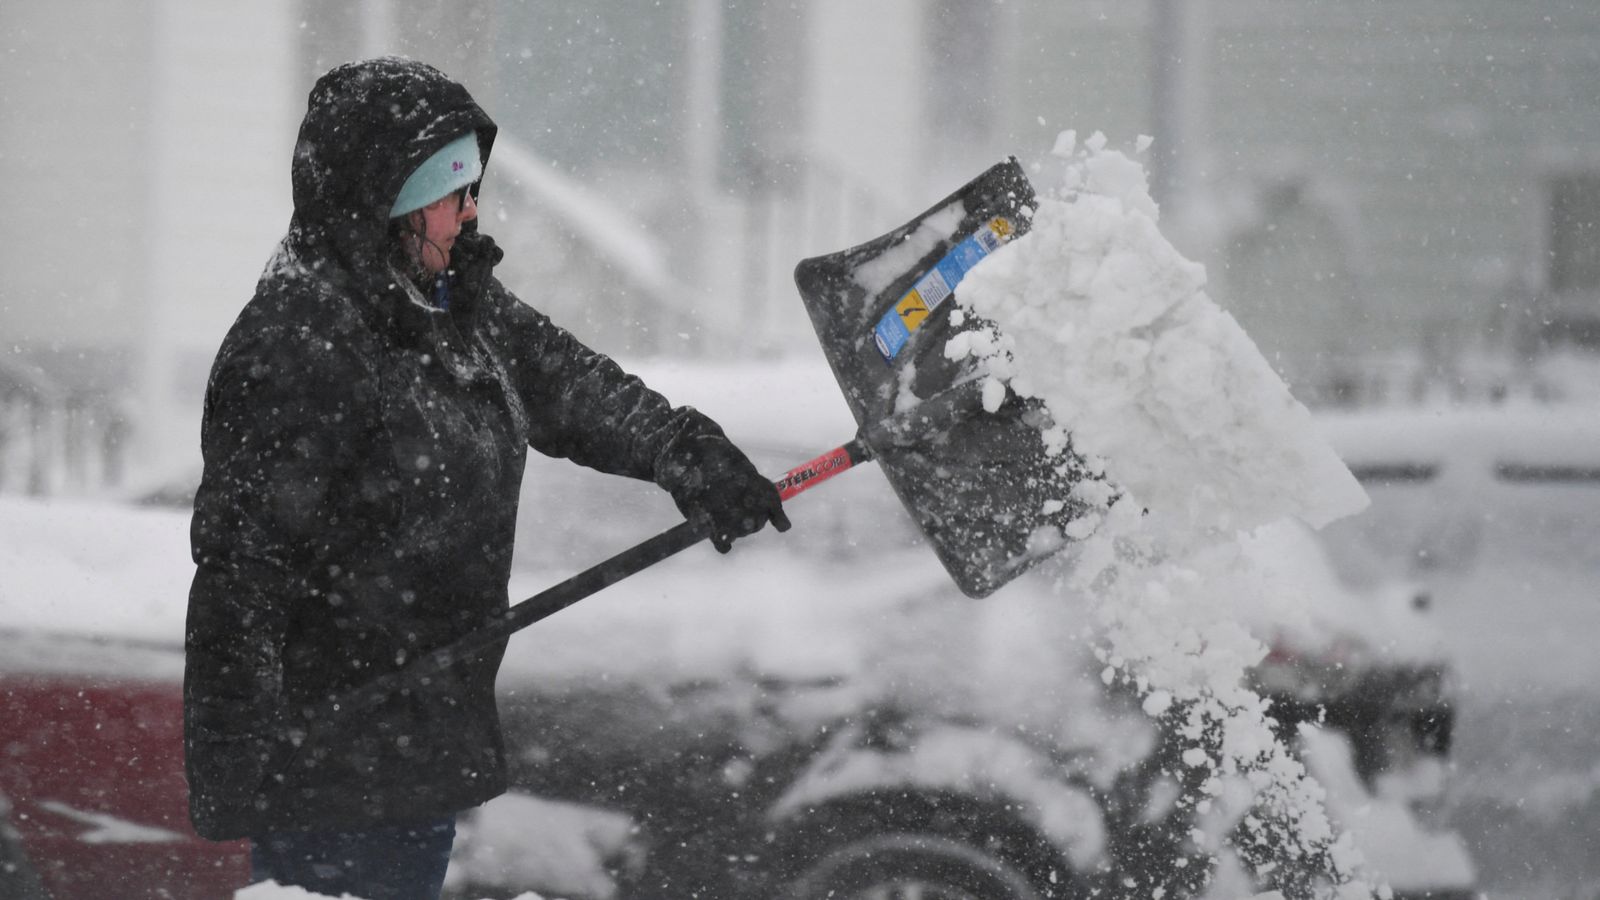 Major 'coast-to-coast storm' to hit US after weekend of heavy snow